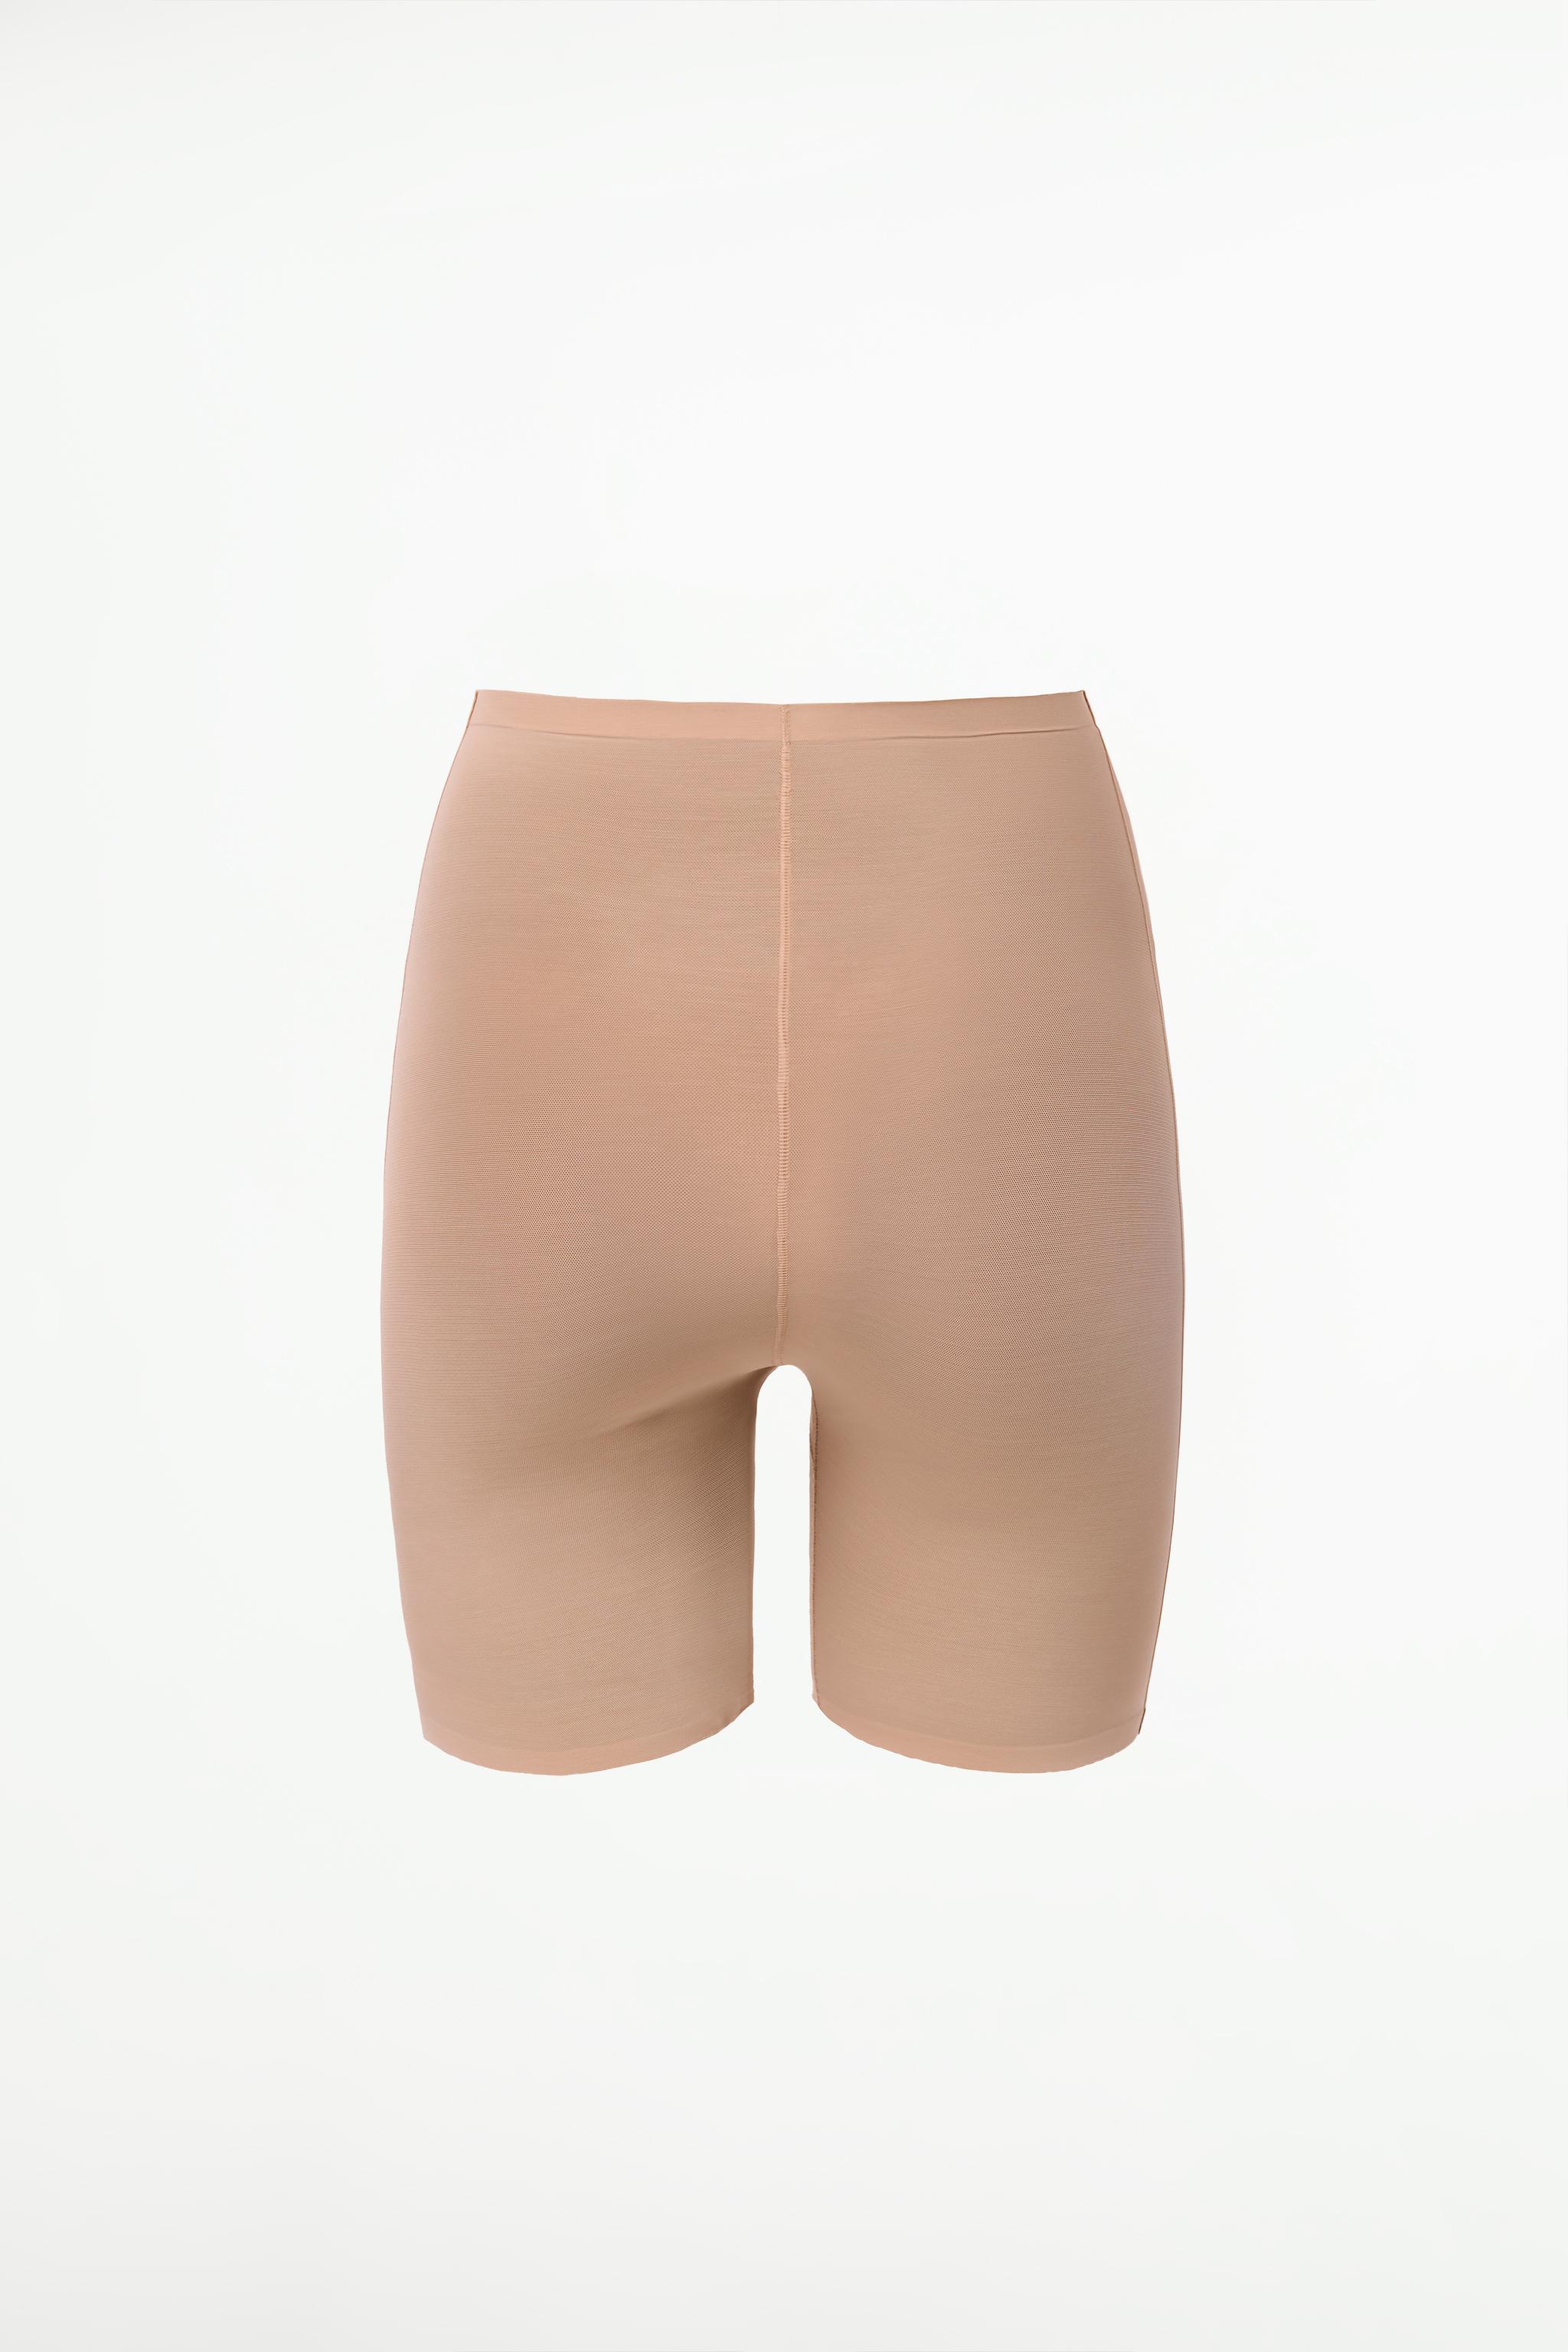 SCULPTING SHORTS - Champagne